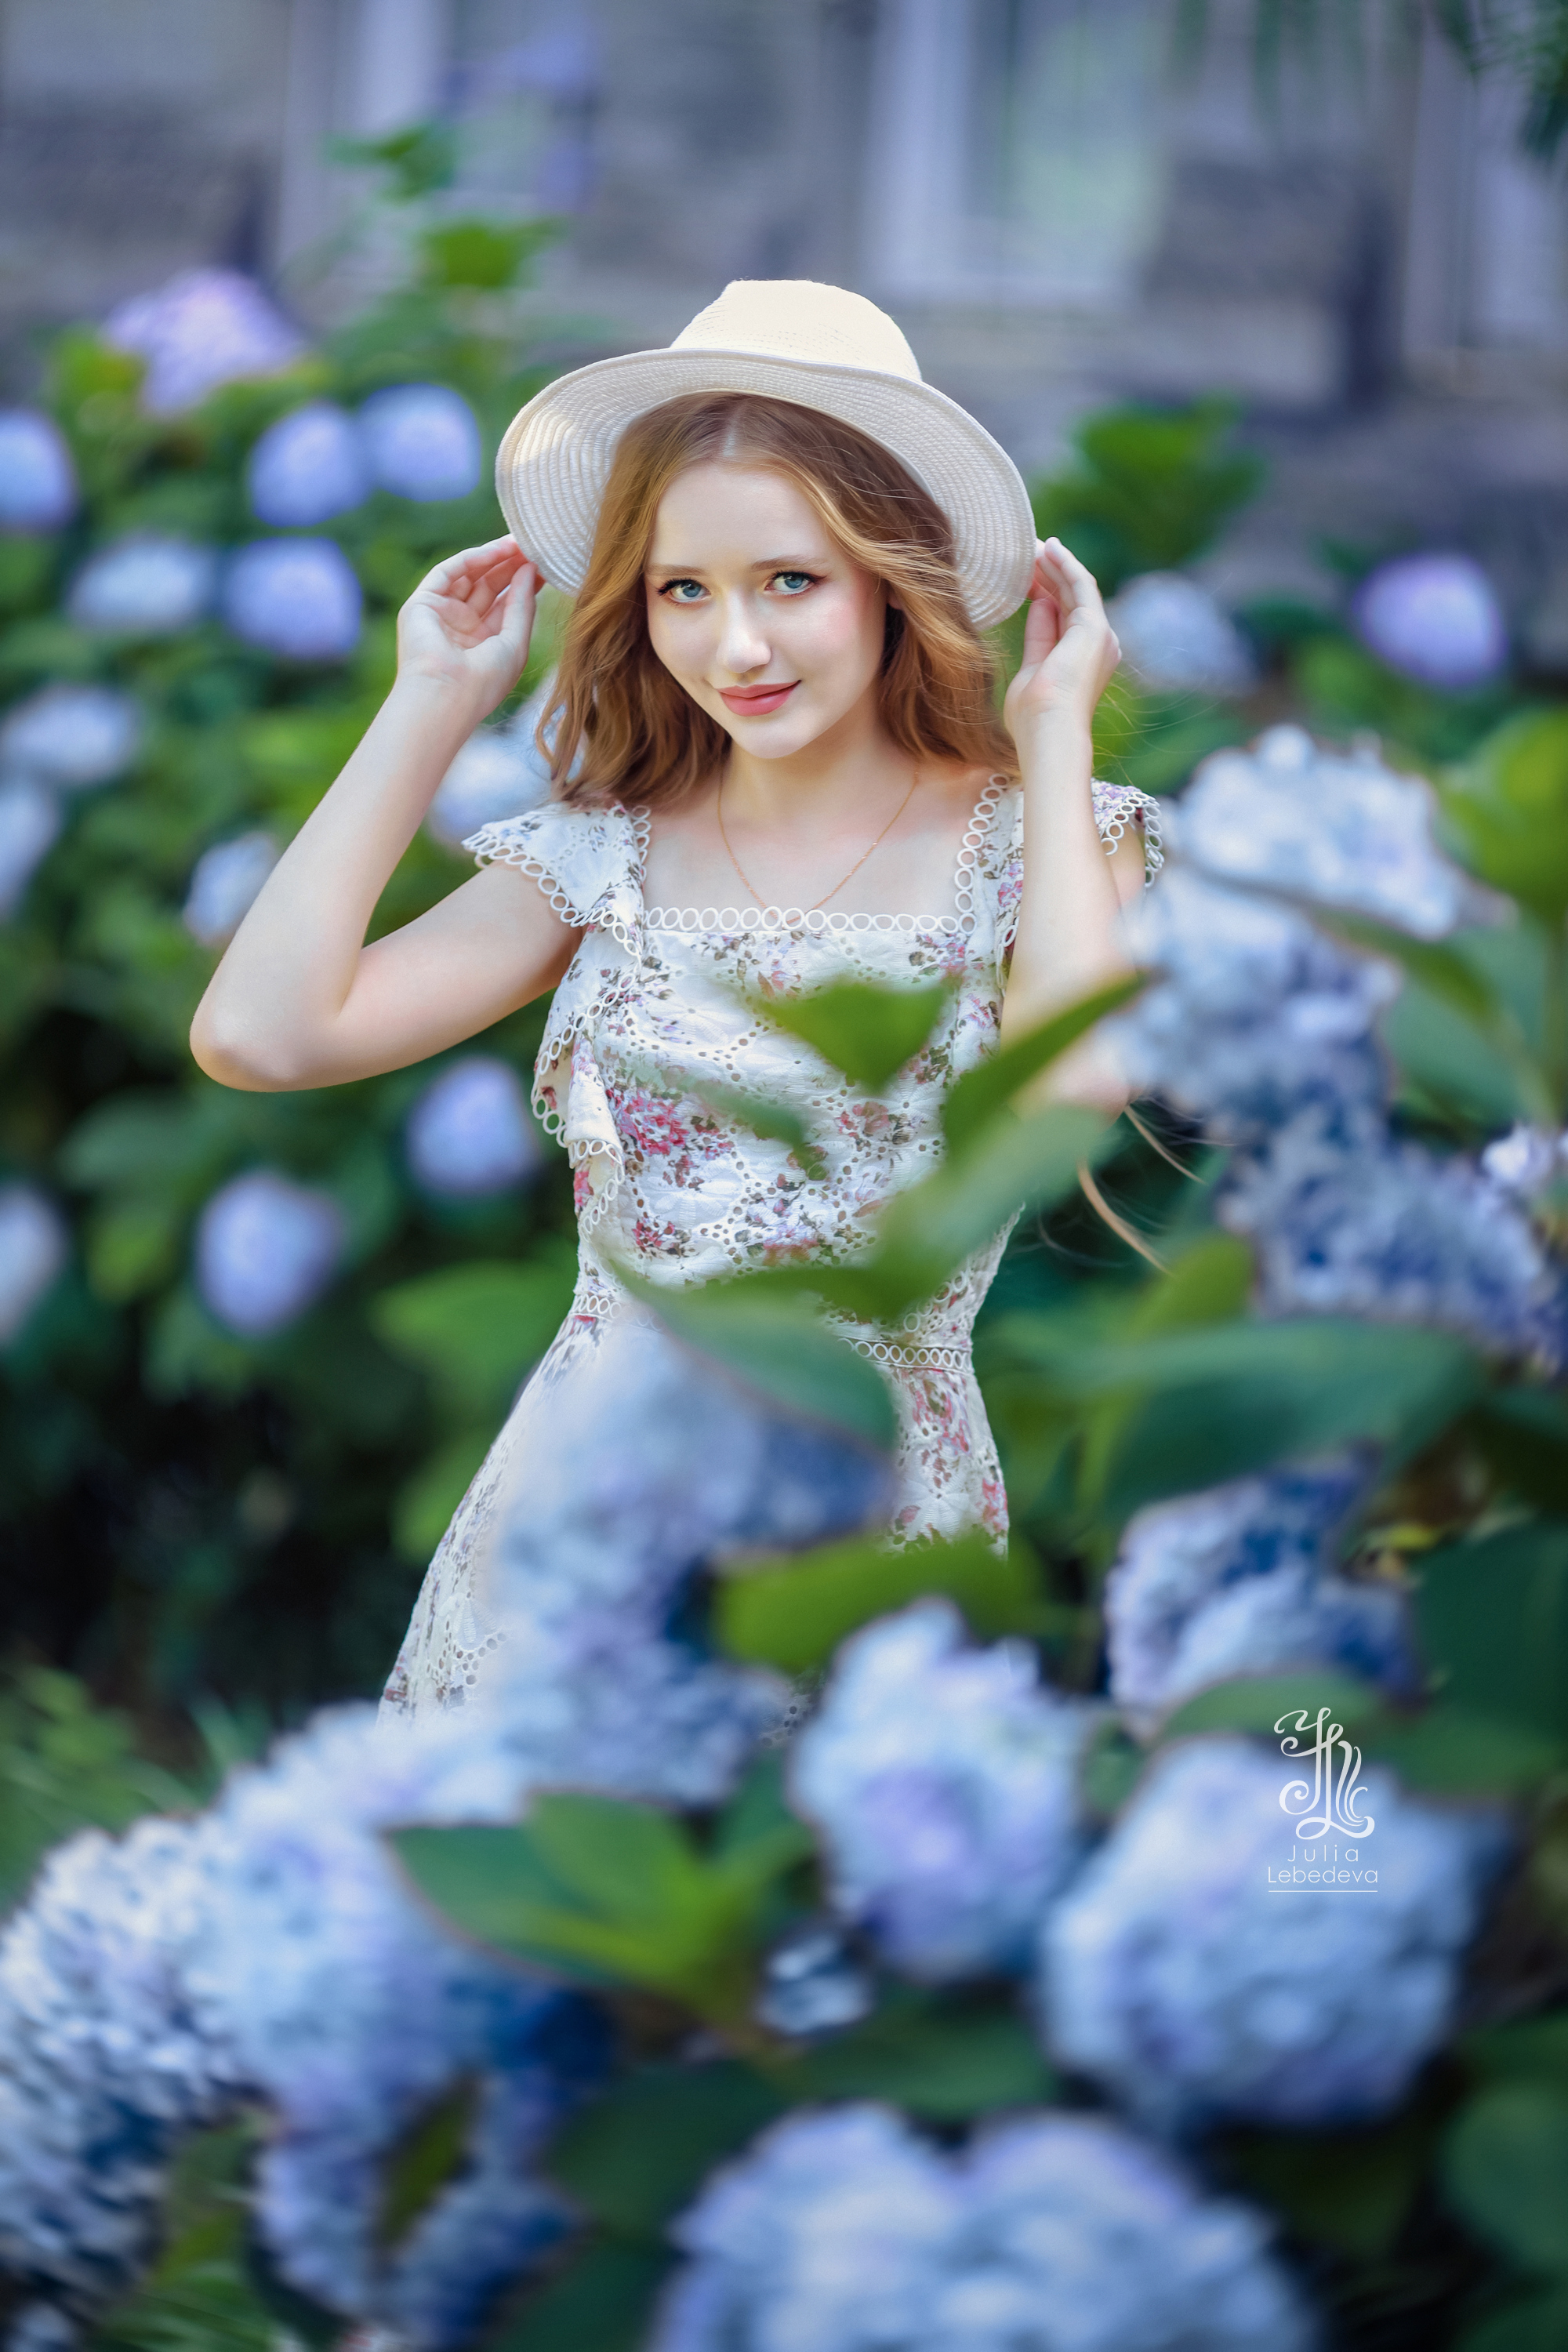 horizontal, photography, outdoors, nature, youngwomen, oneperson, beautifulwoman, flower, beauty, portrait, fashion, lifestyles, day, dress, hat, flowers, Лебедева Юлия